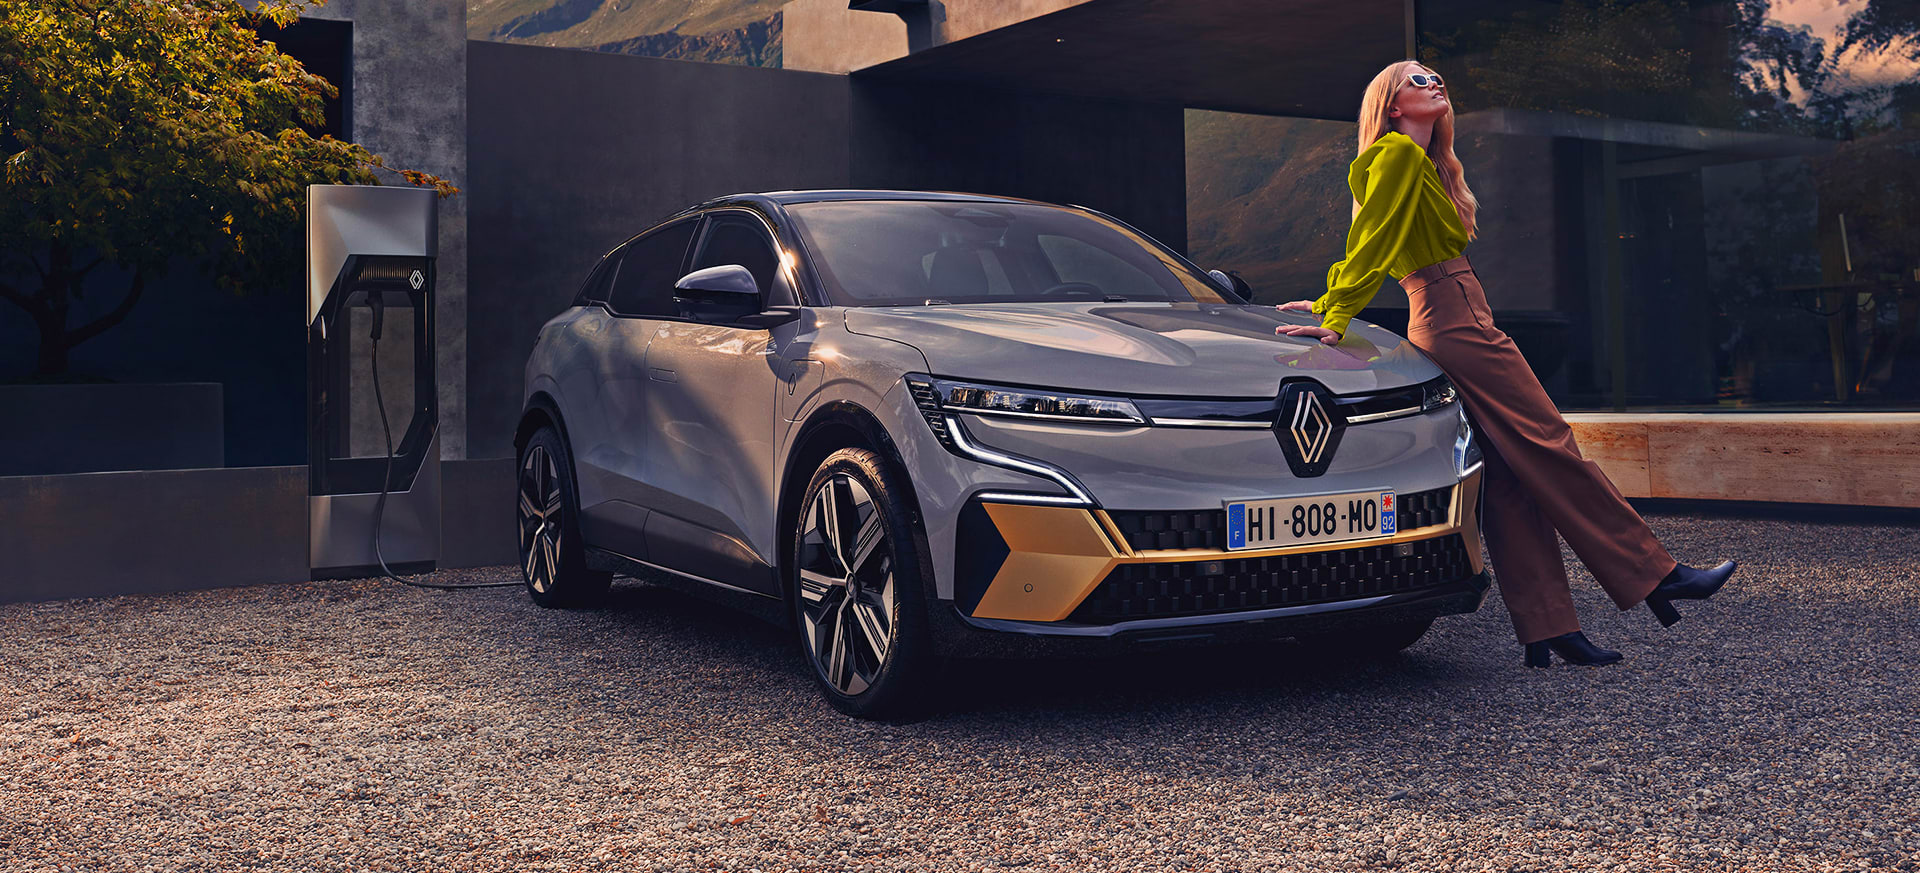 Drive 100% electric with all new Megane E-Tech